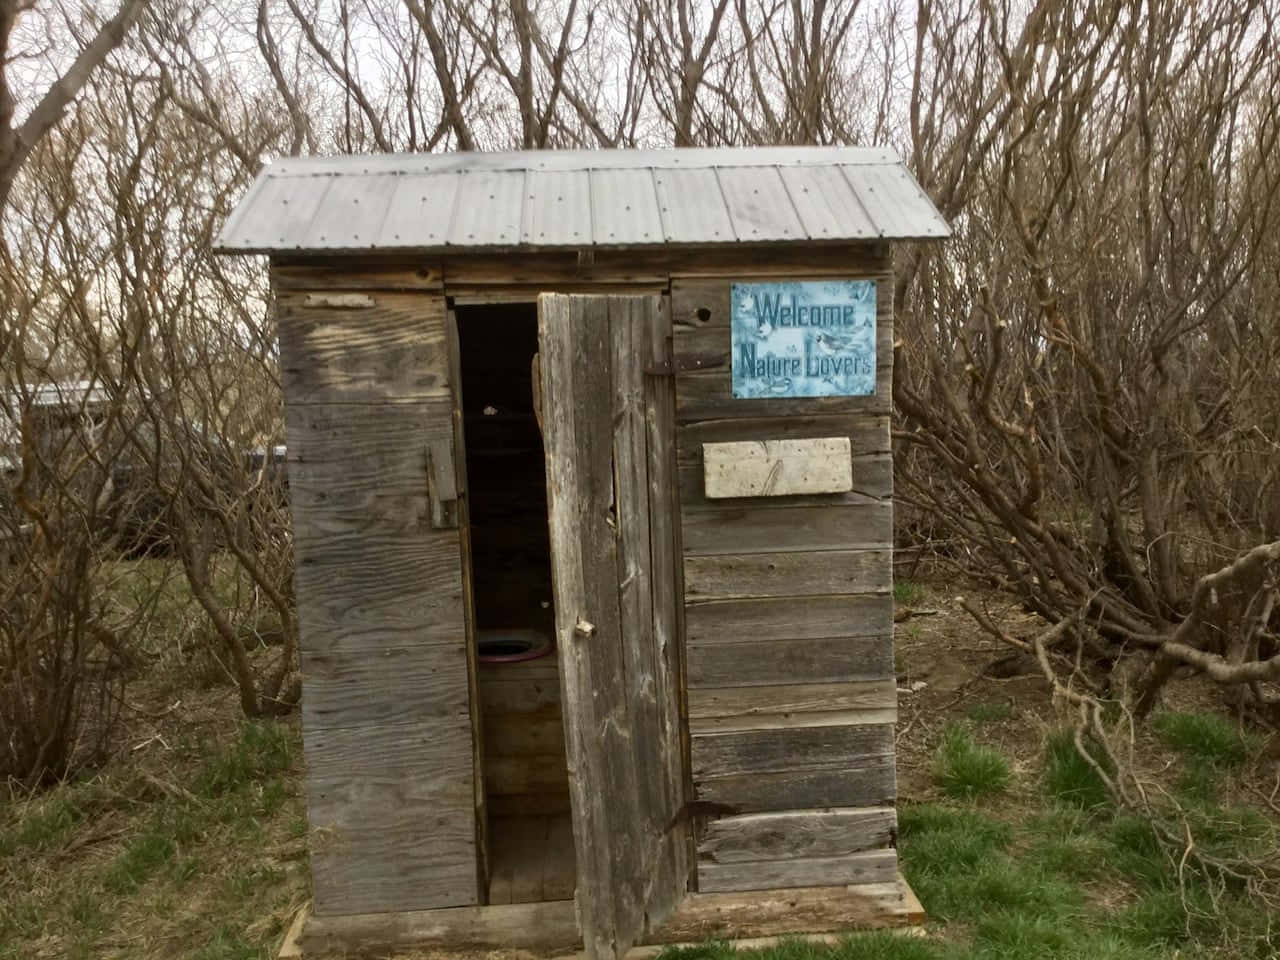 A Traditional Outhouse Set Amidst a Rural Landscape